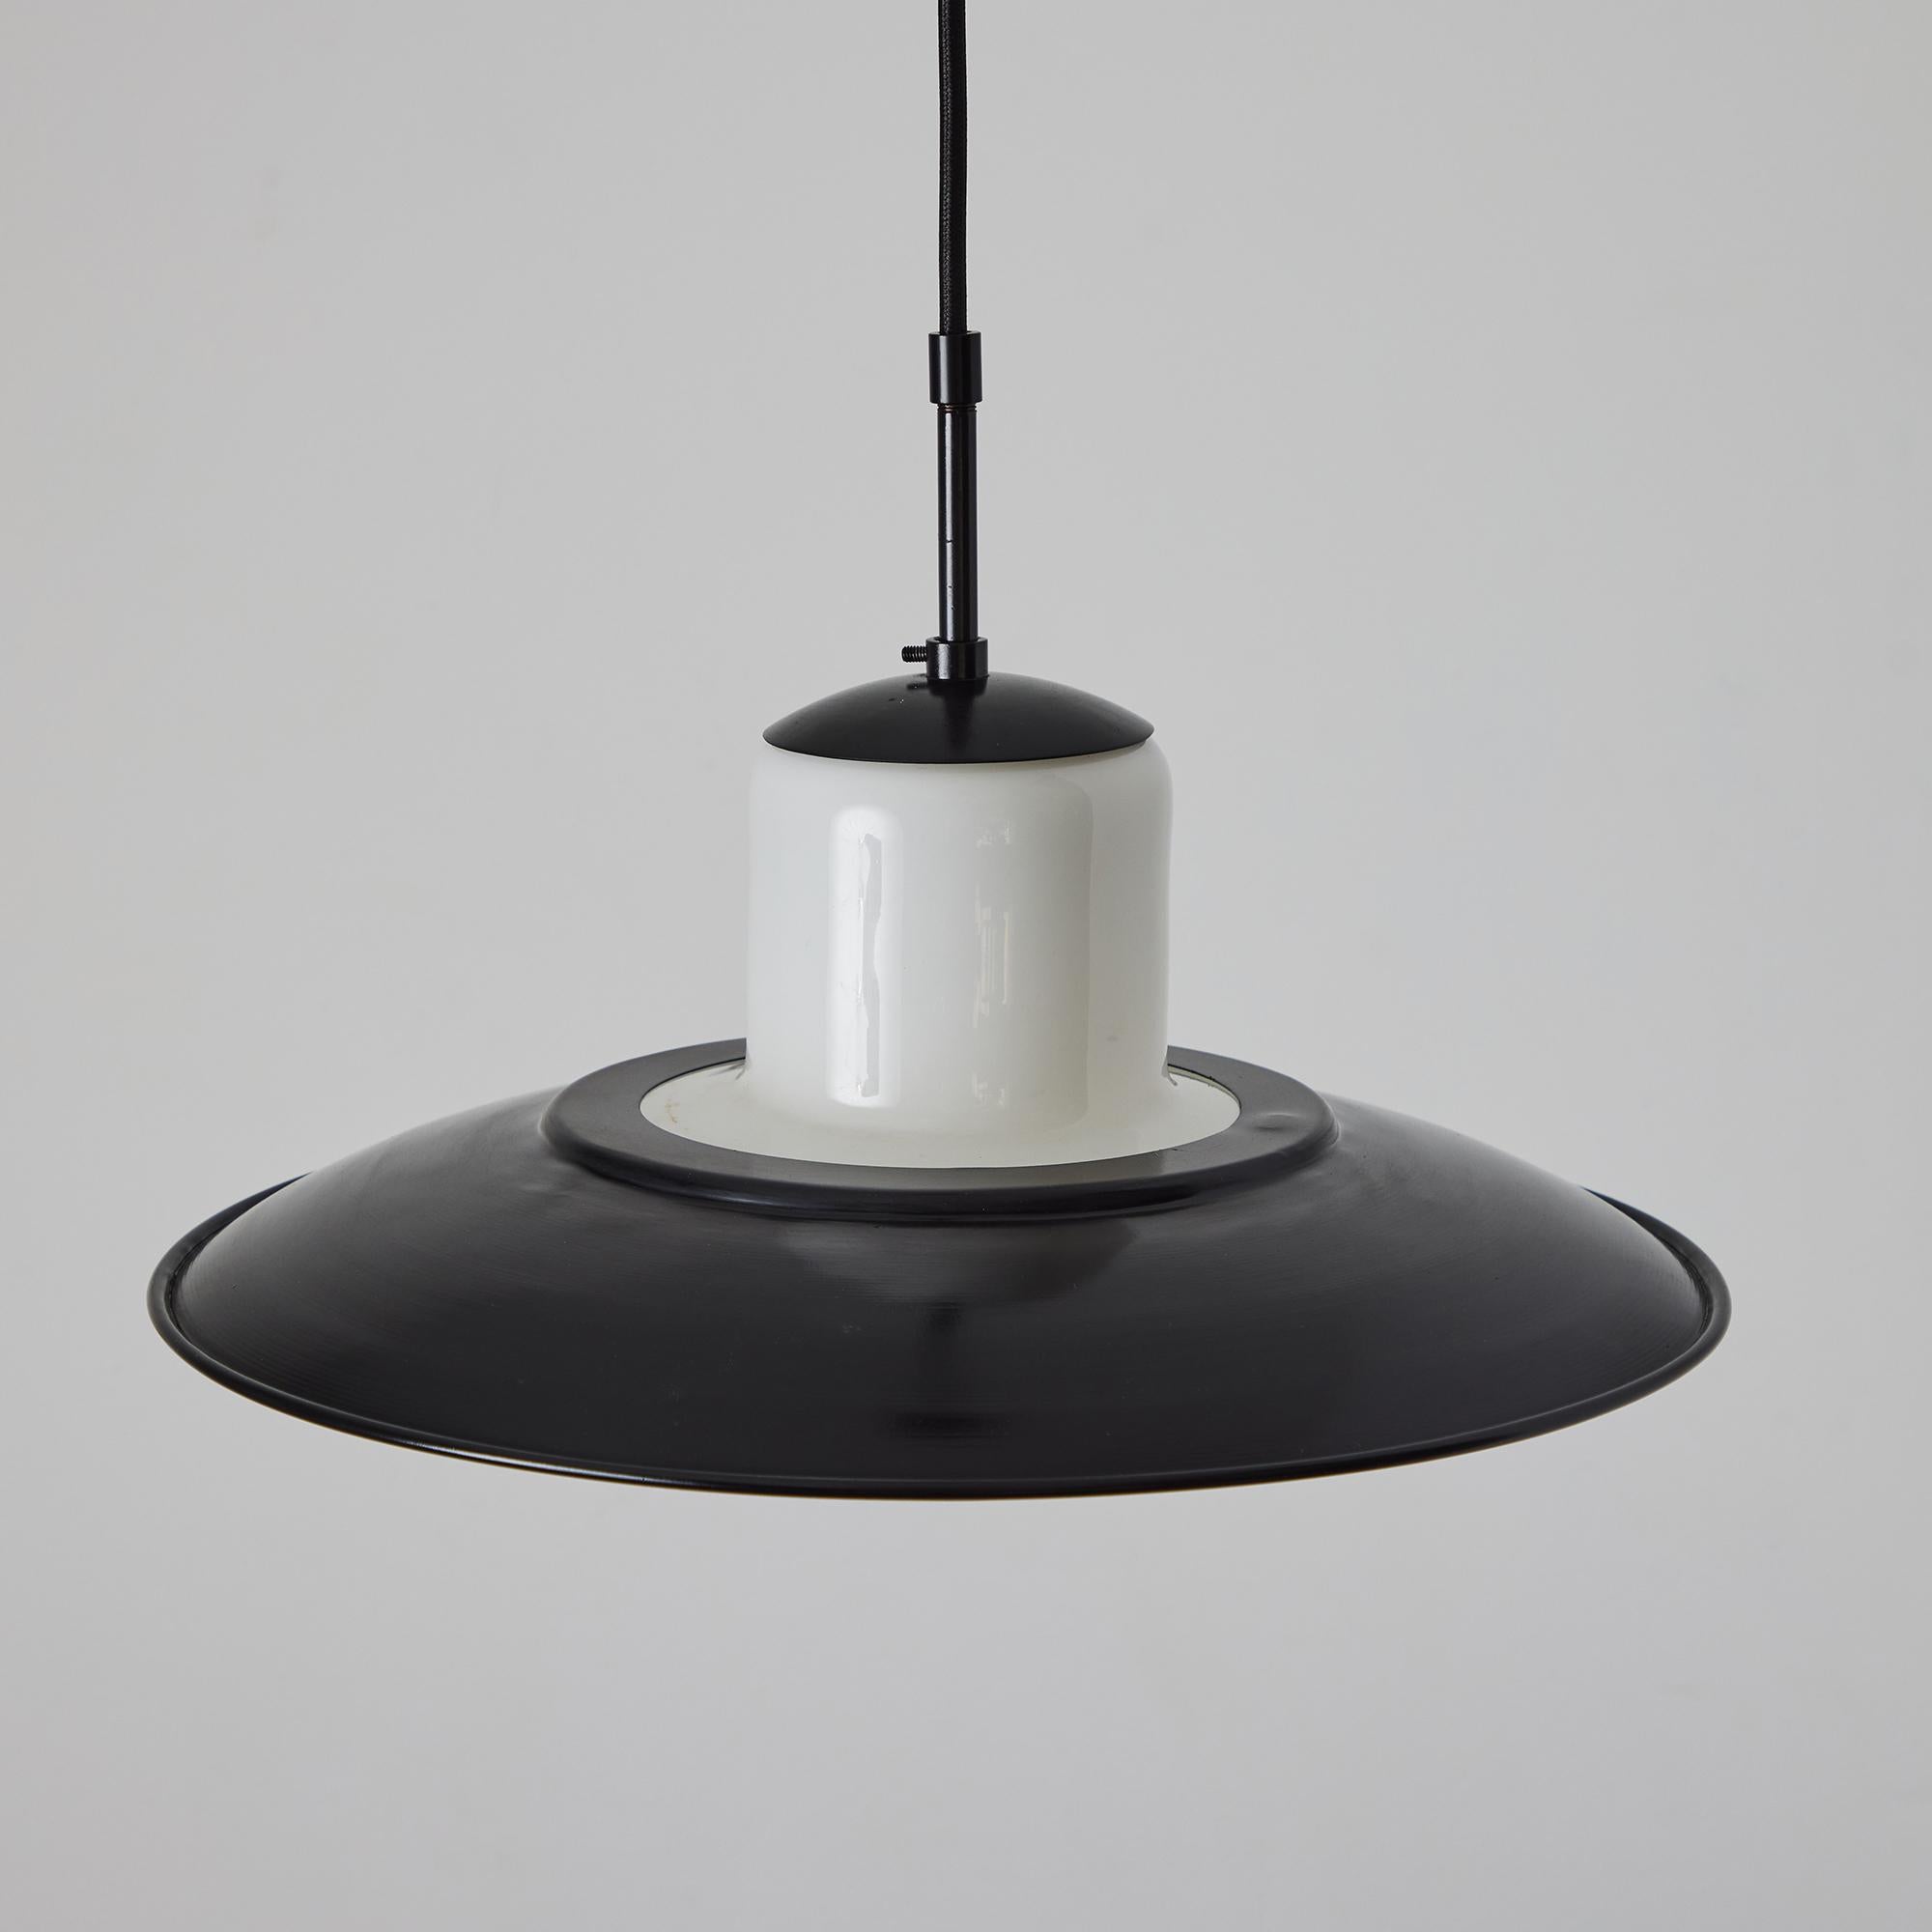 Painted 1940s Gunilla Jung Model #1005 Glass & Metal Ceiling Lamp for Stockmann Orno For Sale